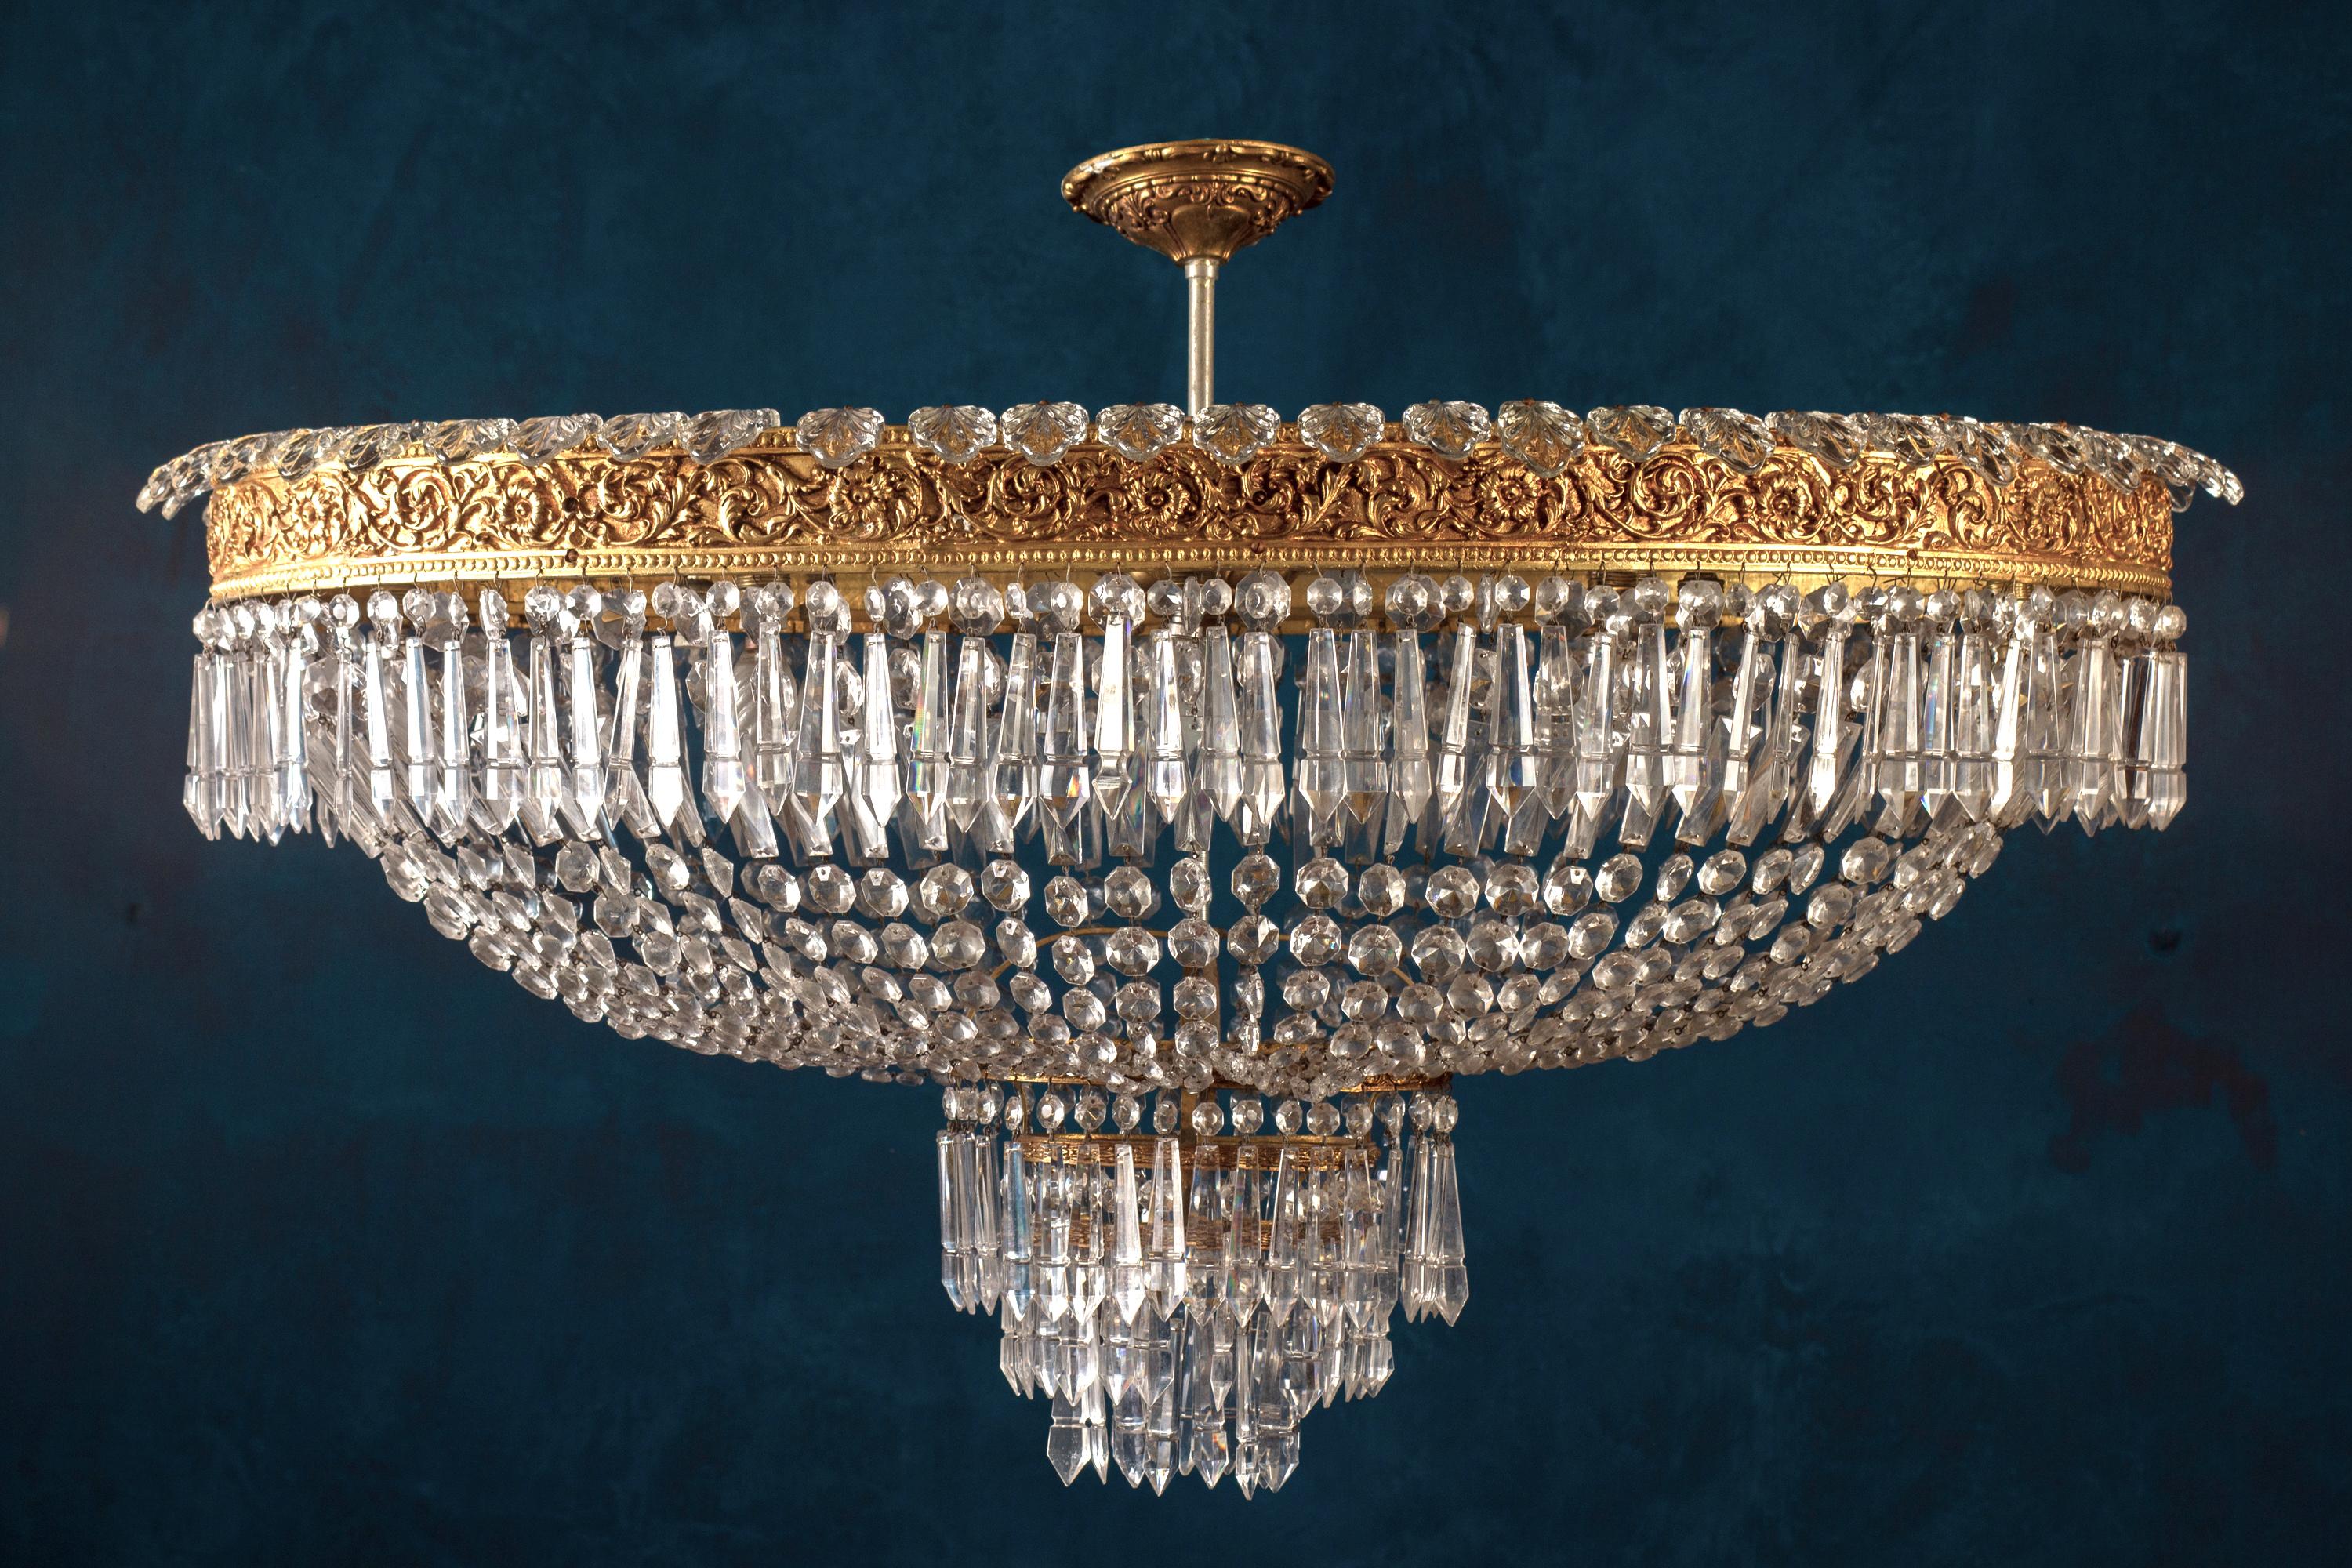 This sumptuous large and oval shaped chandelier supporting a set of precious cut crystal prisms, octagons, oak leaves etc. Matching bronze gilded chain and a ceiling canopy.
Ideal for a large reception room, dining room or entrance hall